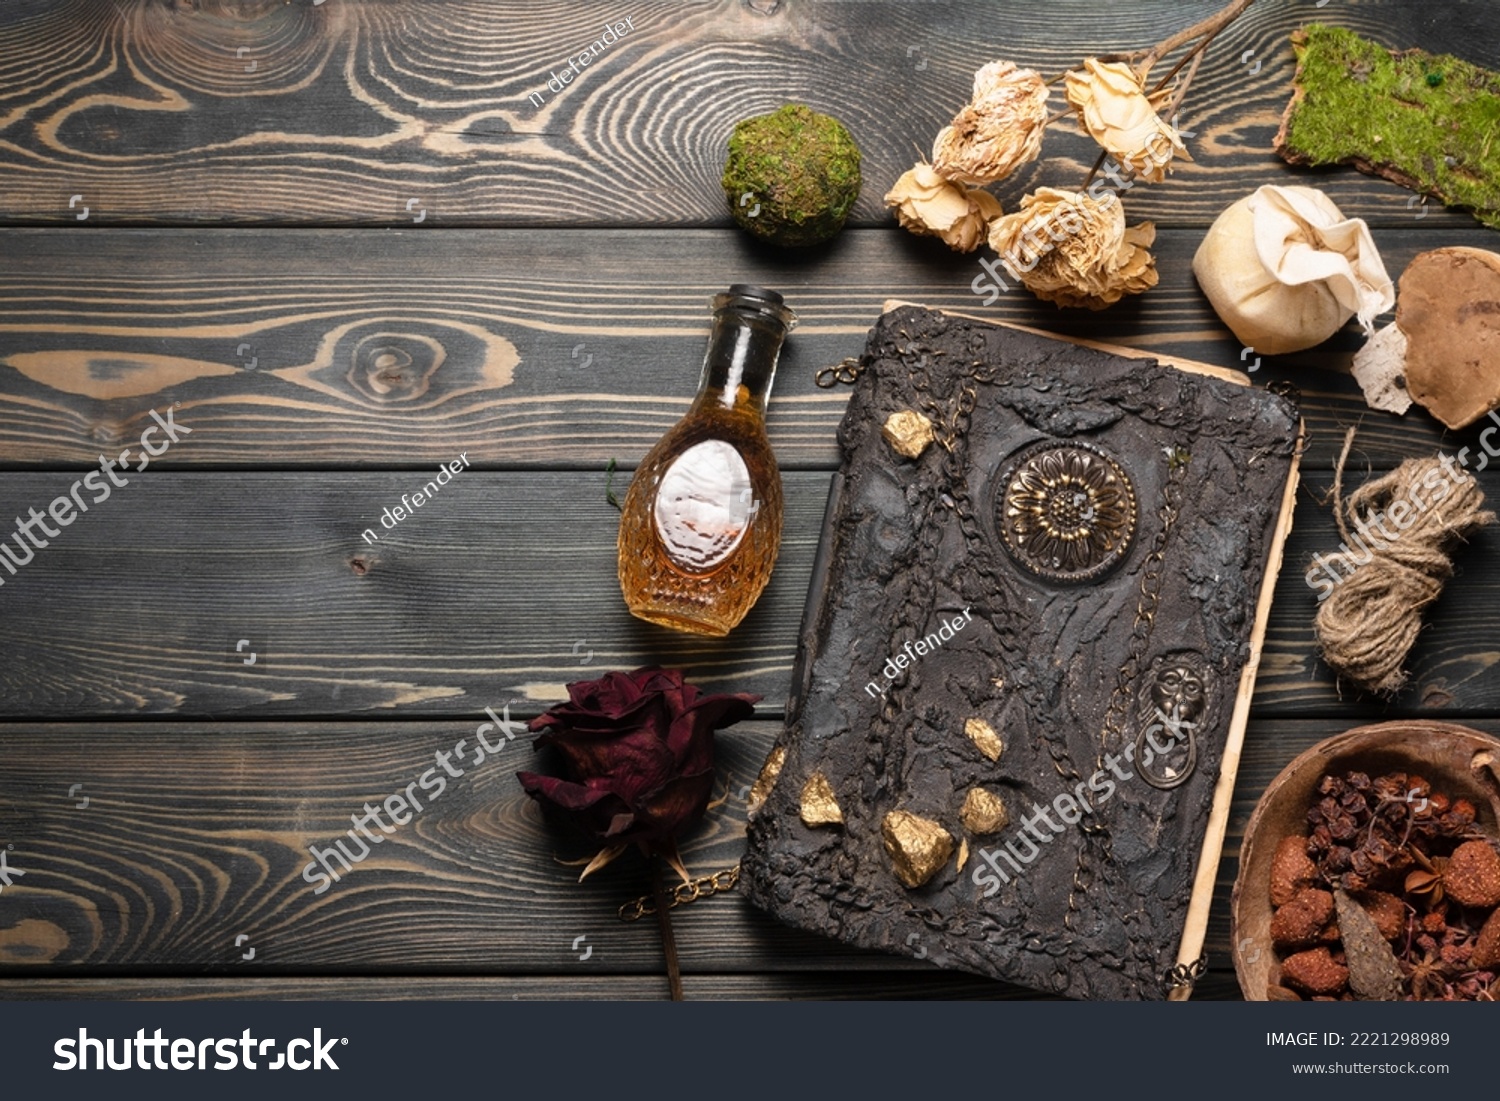 Old magic book and dry natural herbs and remedy bottle on the wooden table flat lay background with copy space. #2221298989